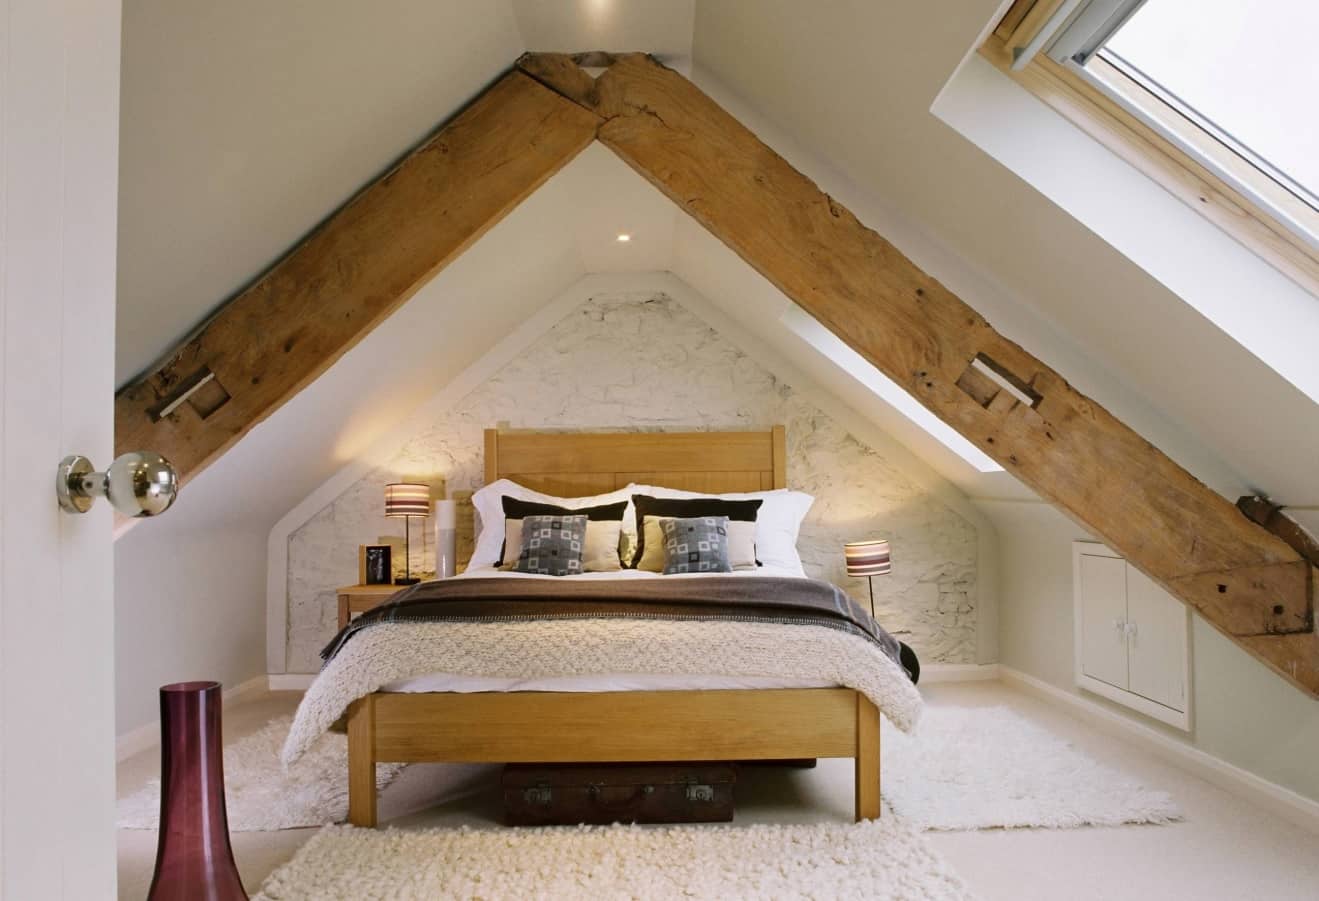 8 Best Loft Conversion Ideas for 2020. Chic lof bedroom with exposed wooden beams